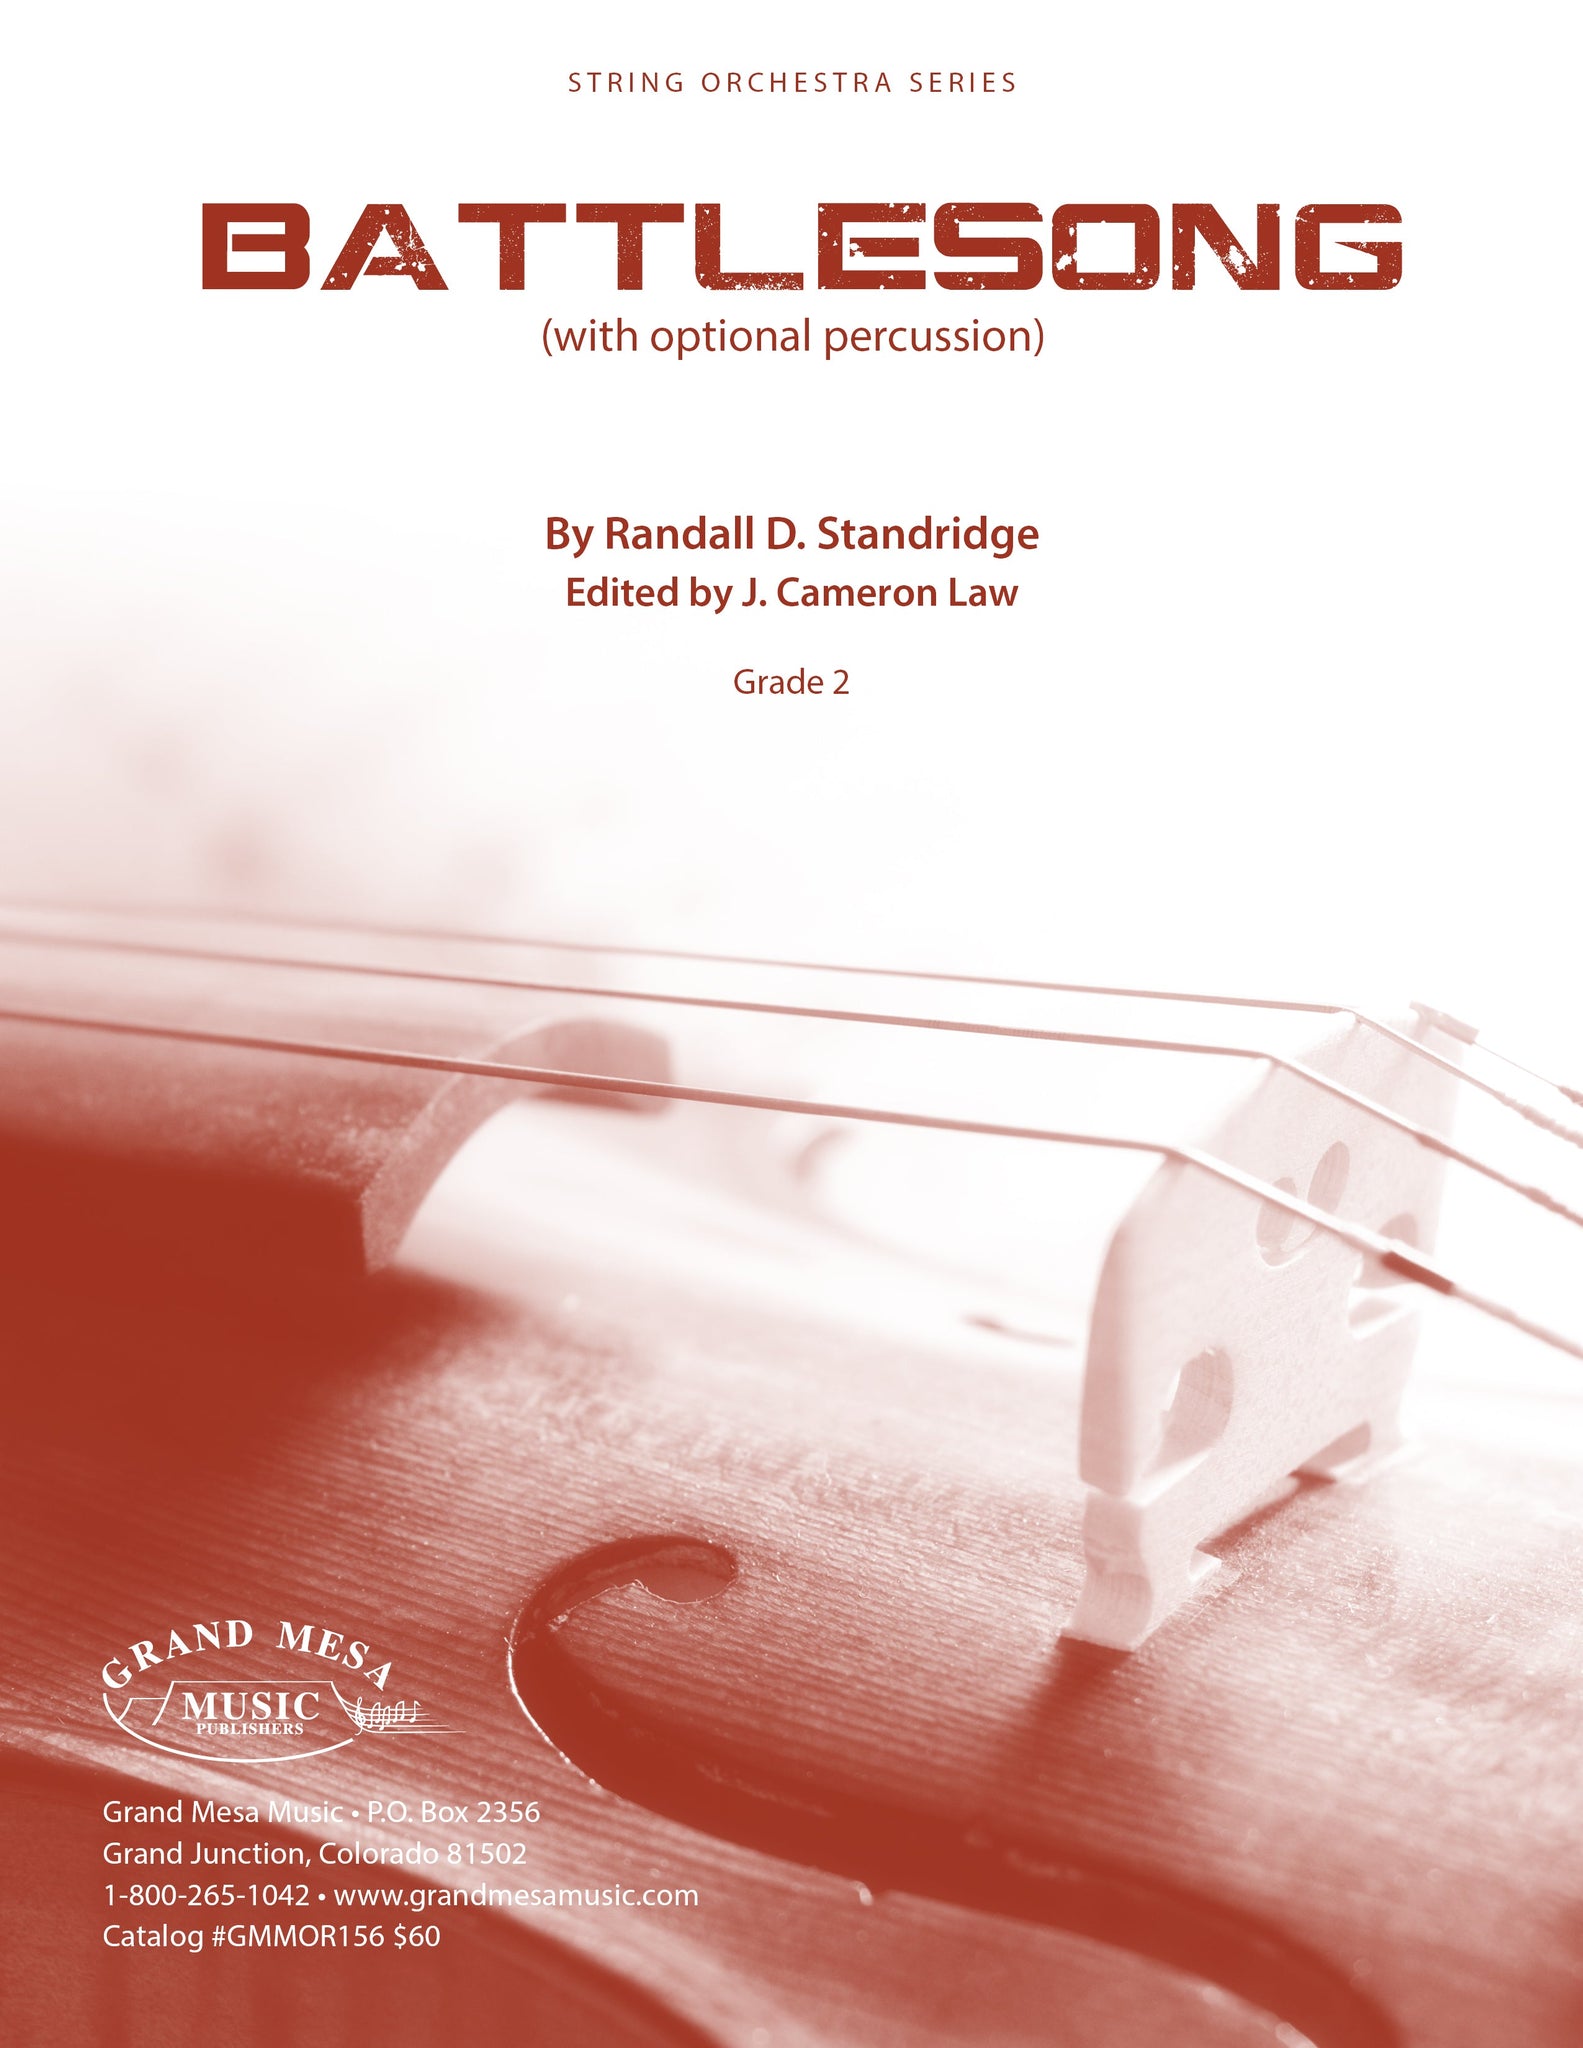 Strings sheet music cover of Battlesong, composed by Randall D. Standridge.